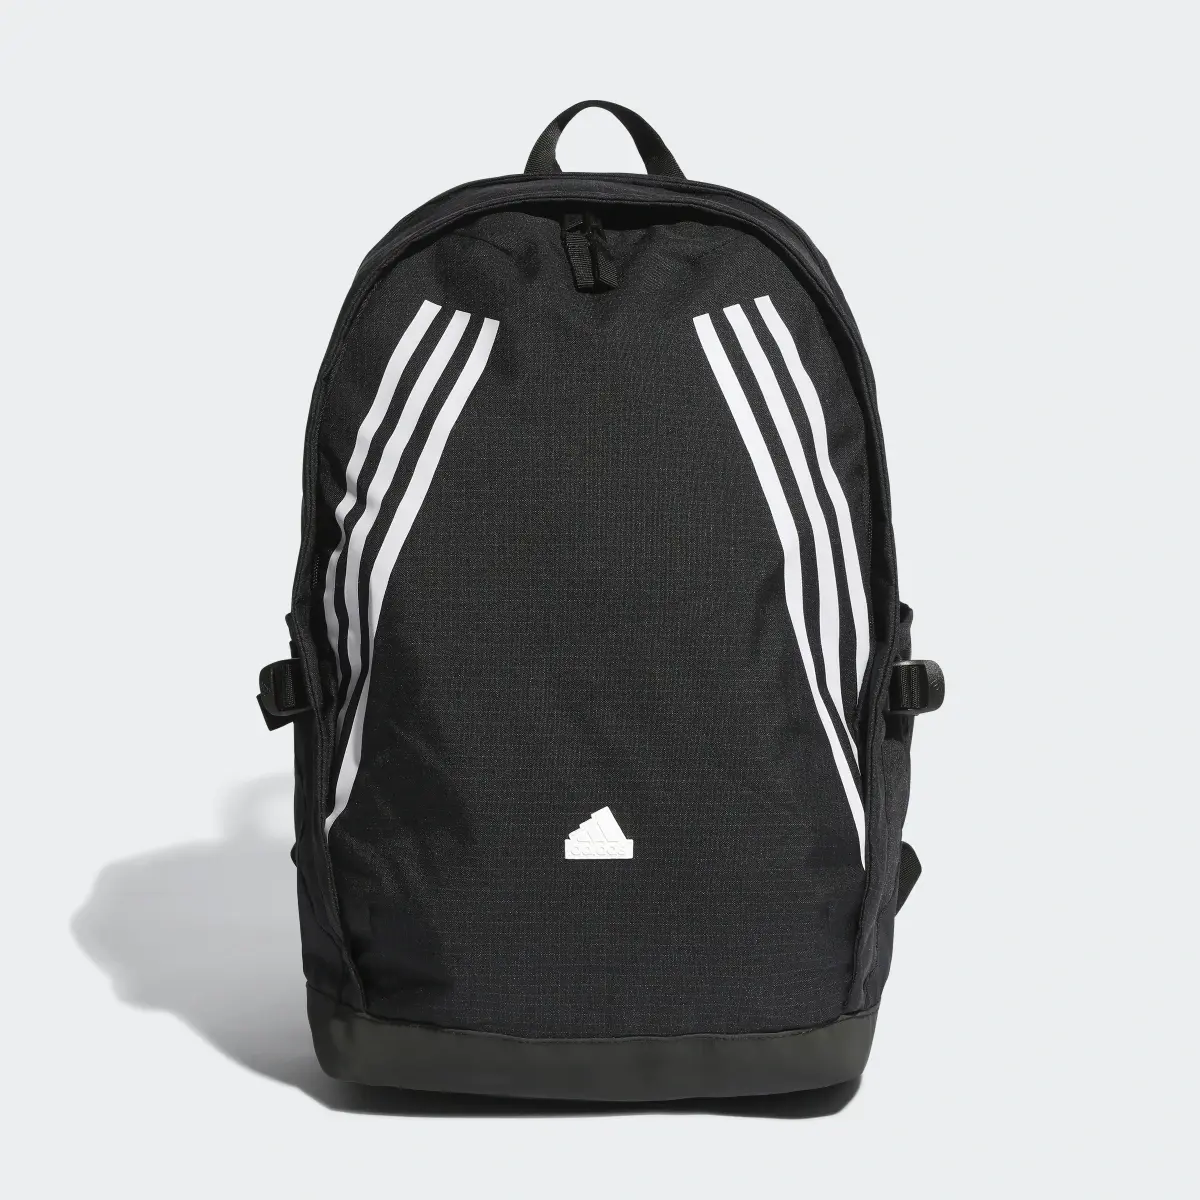 Adidas Back to School Backpack. 2